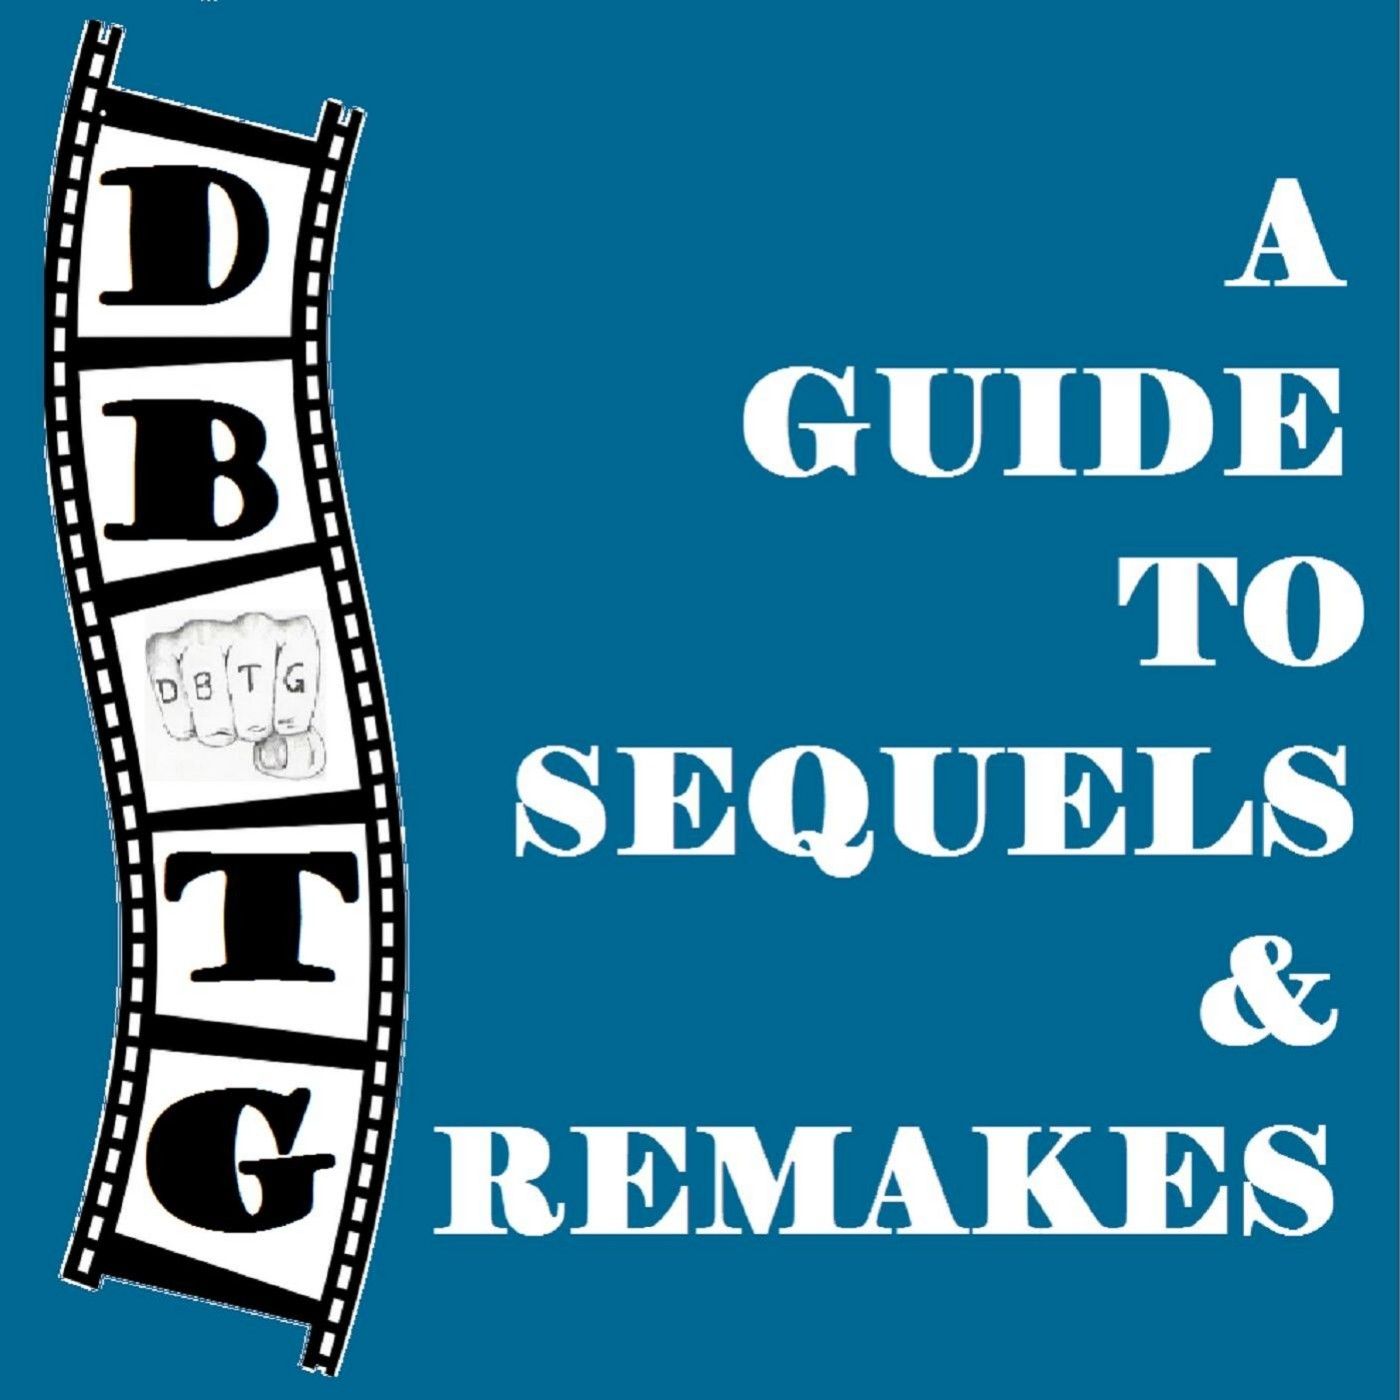 DBTG: A Guide to Sequels and Remakes